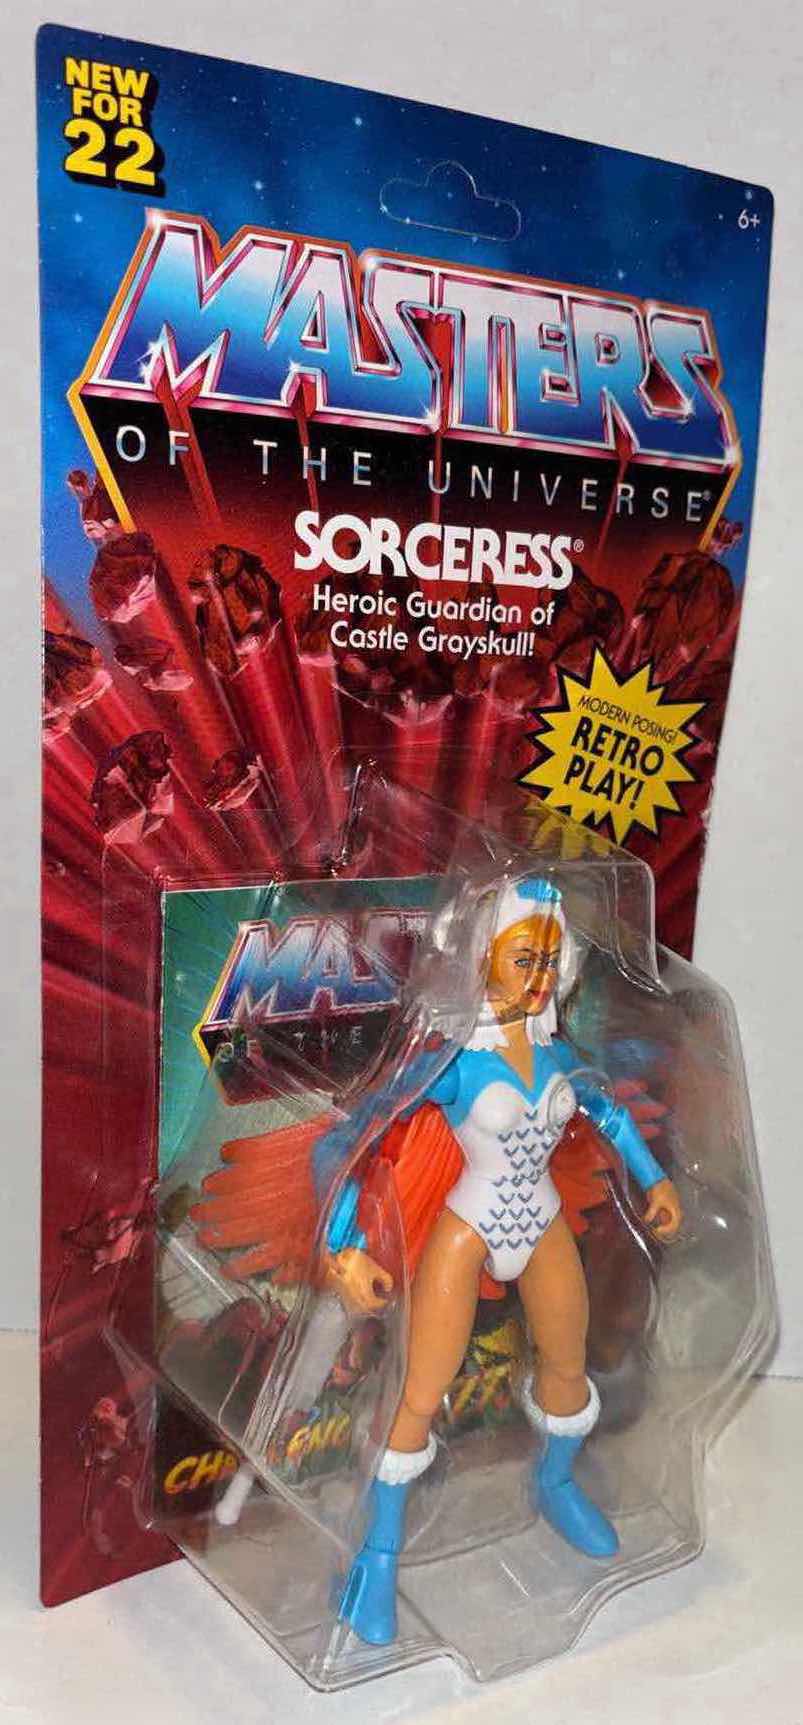 Photo 1 of NEW MATTEL MASTERS OF THE UNIVERSE “SORCERESS” ACTION FIGURE & ACCESSORIES (1)